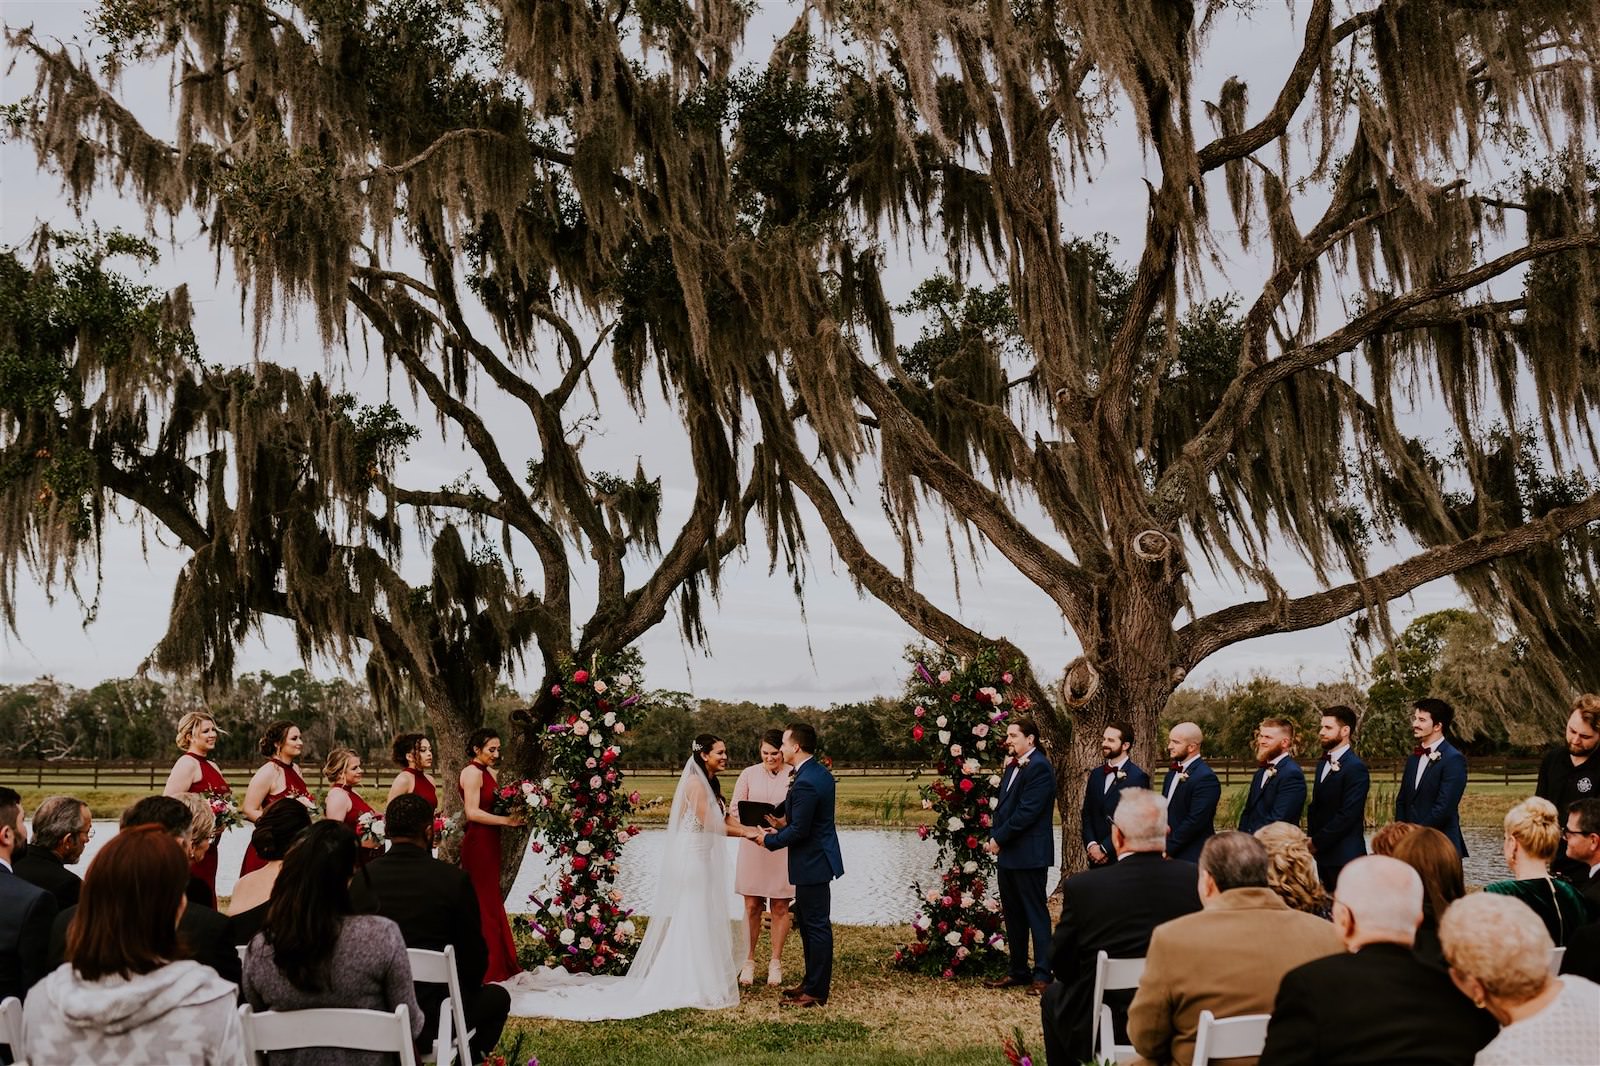 Rustic Tampa Outdoor Oak Tree Wedding Ceremony Backdrop Stands with Floral Garland | Tampa Wedding Florist Monarch Events and Designs | Deep Red Maroon Burgundy Roses and Blush Pink and White Roses with Eucalyptus Greenery | Groom and Groomsmen Wearing Navy Blue Suits | Maroon Burgundy Bridesmaids Dresses